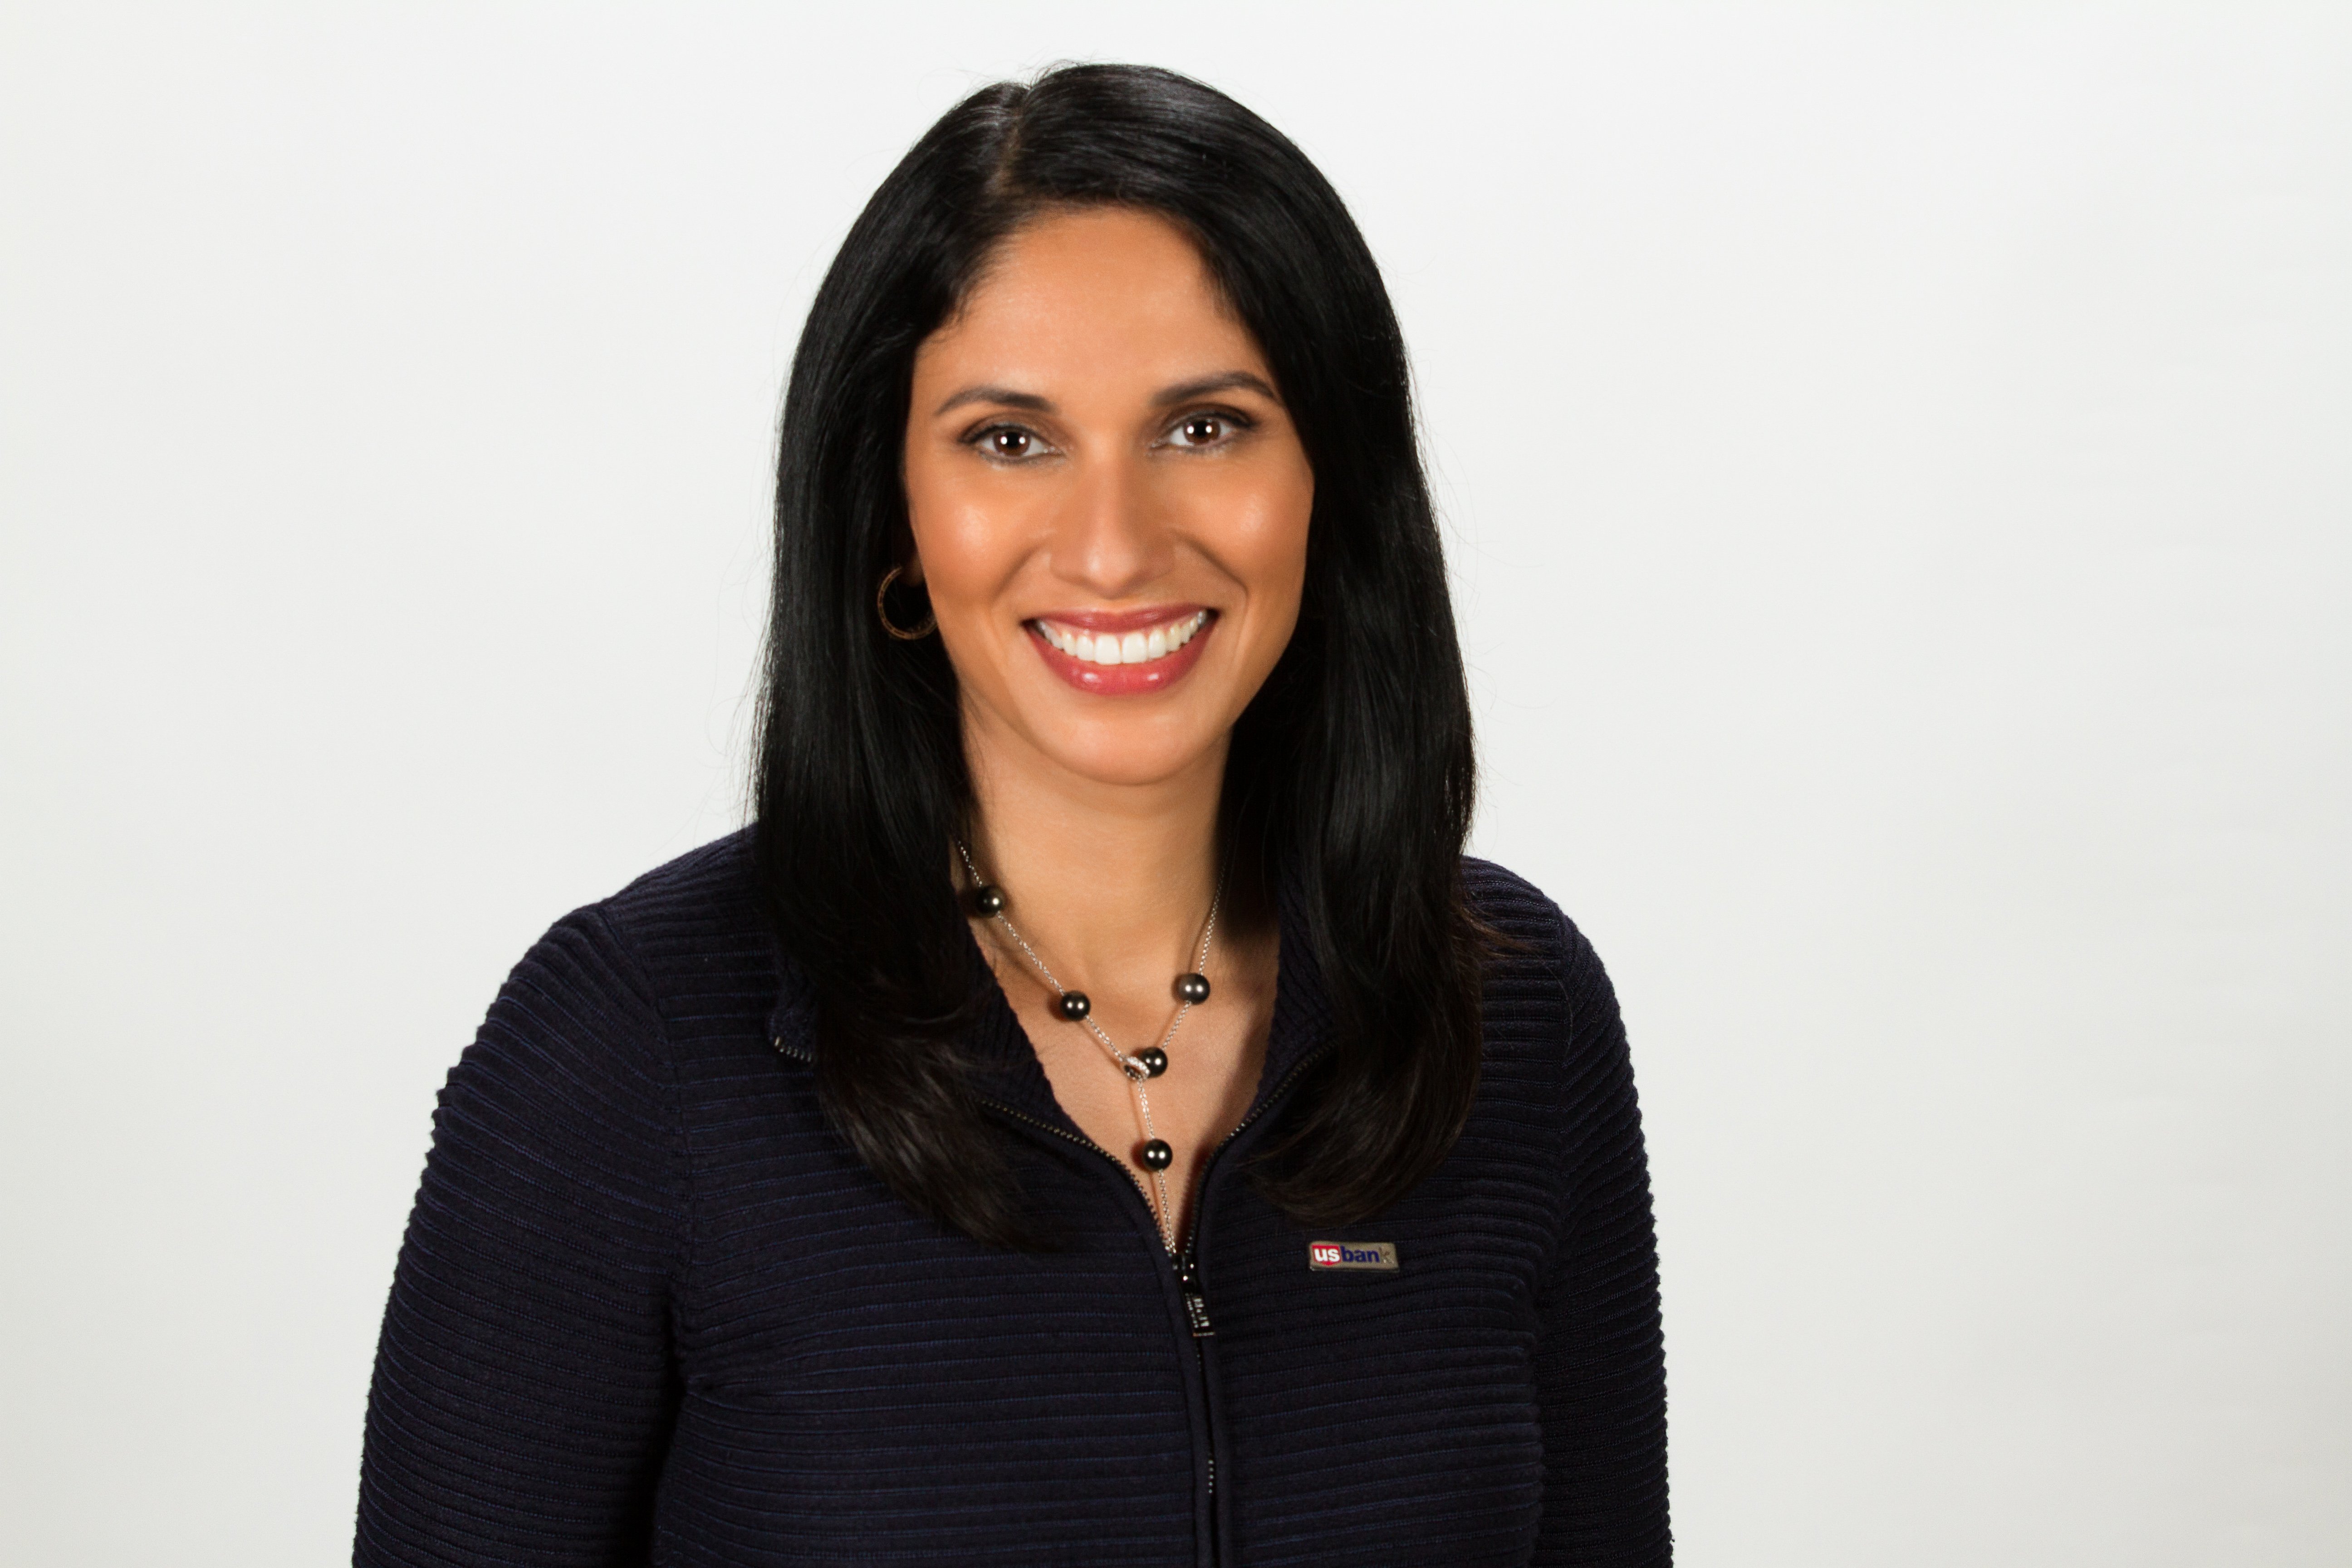 Find out why Gunjan Kedia owes a lot of her career success to the Tepper MBA